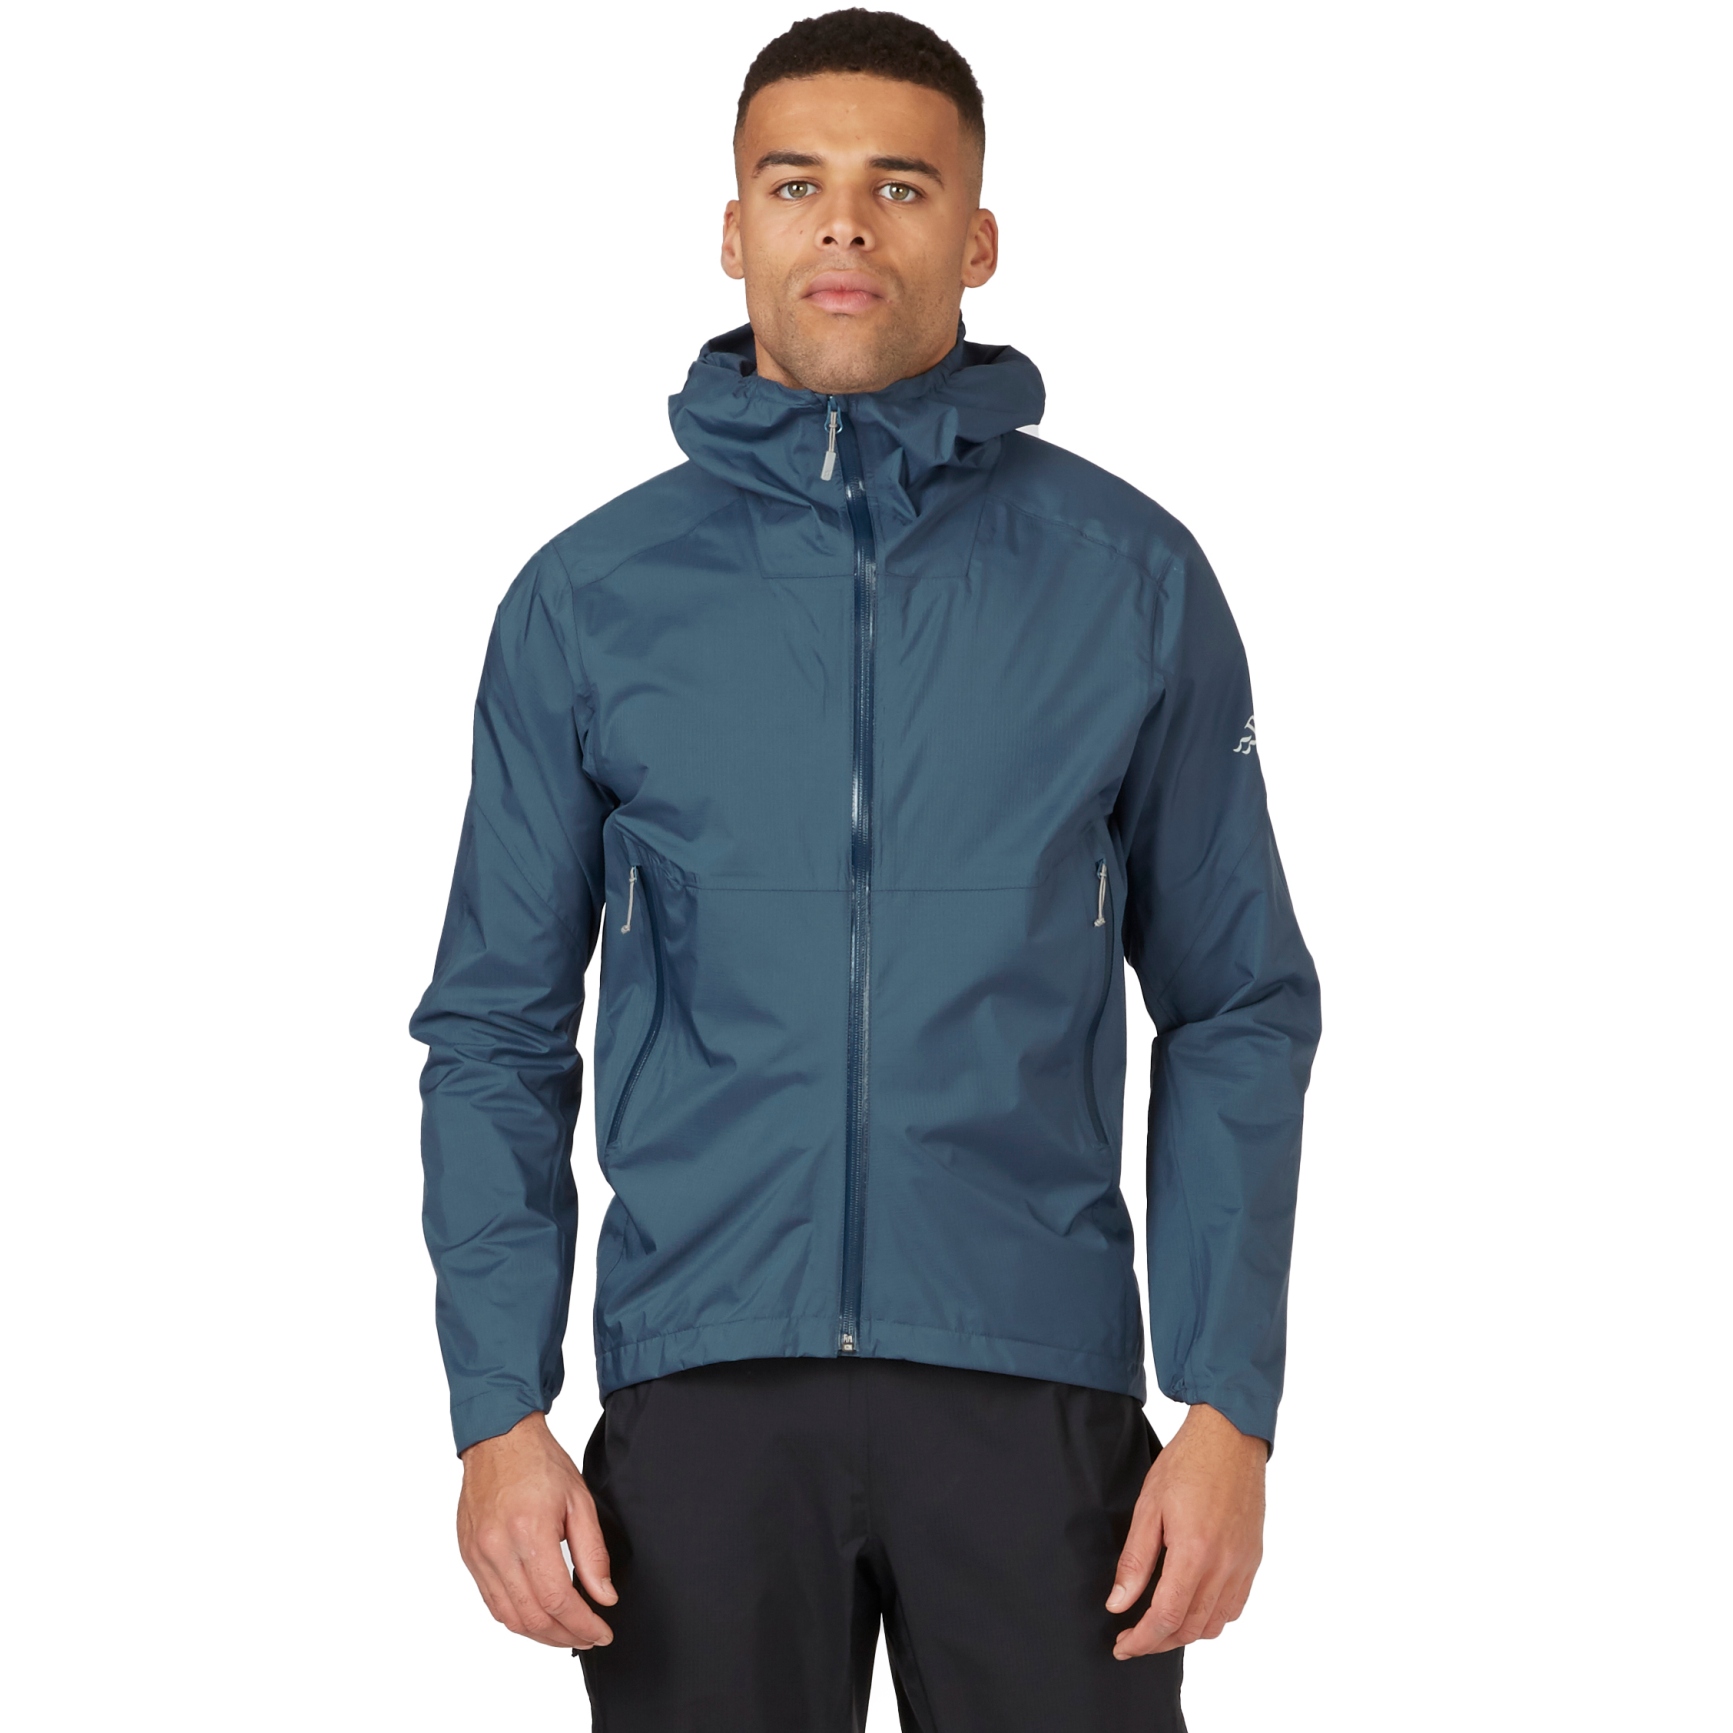 Picture of Rab Cinder Downpour Jacket - orion blue